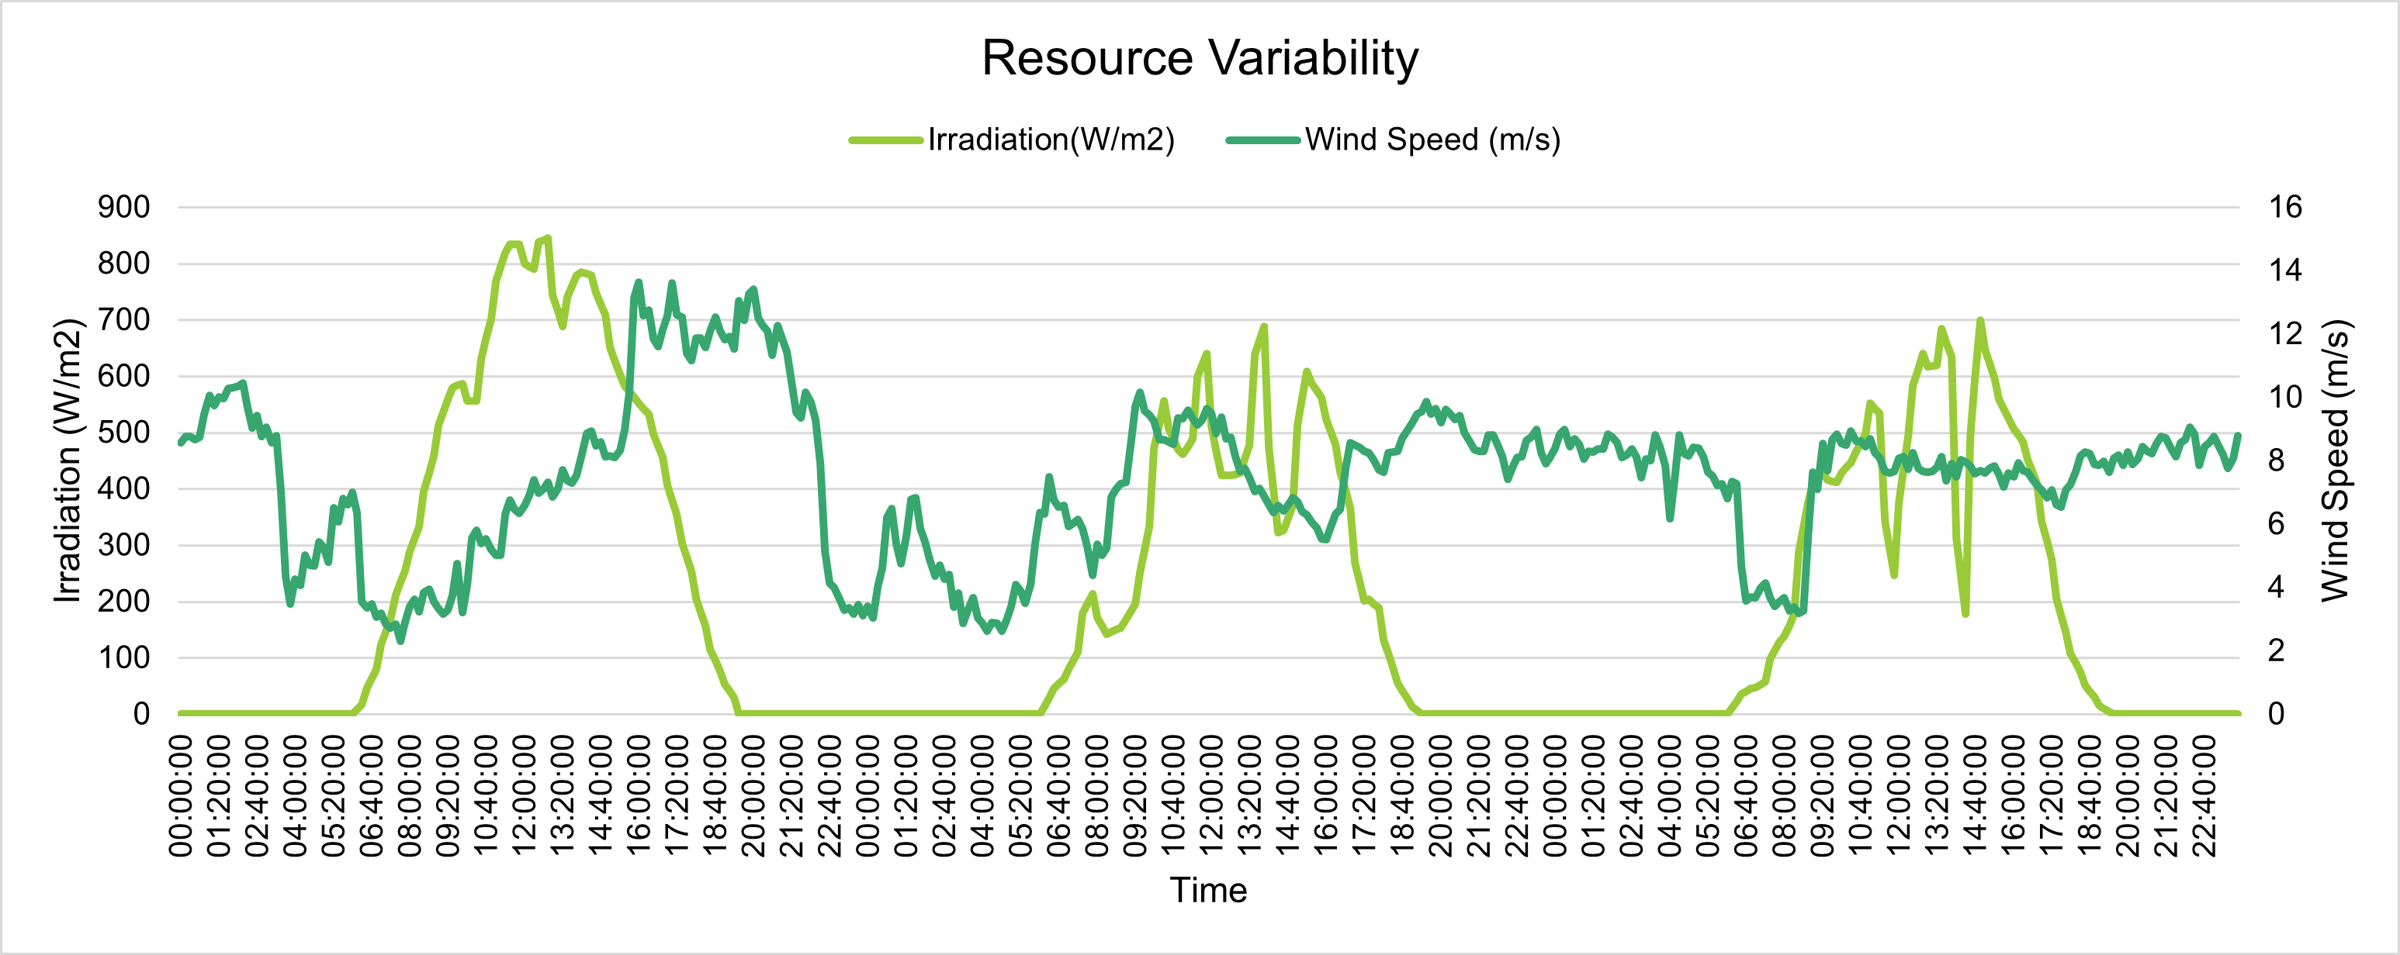 Intra-hour variability of solar and wind energy sources